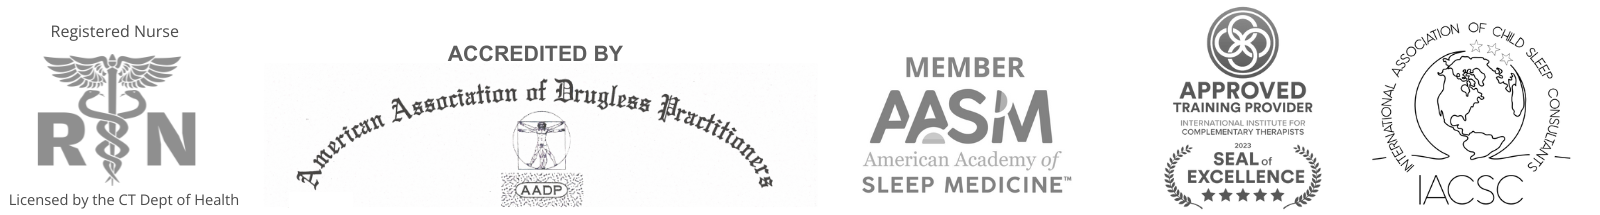 accredited sleep consultant certification